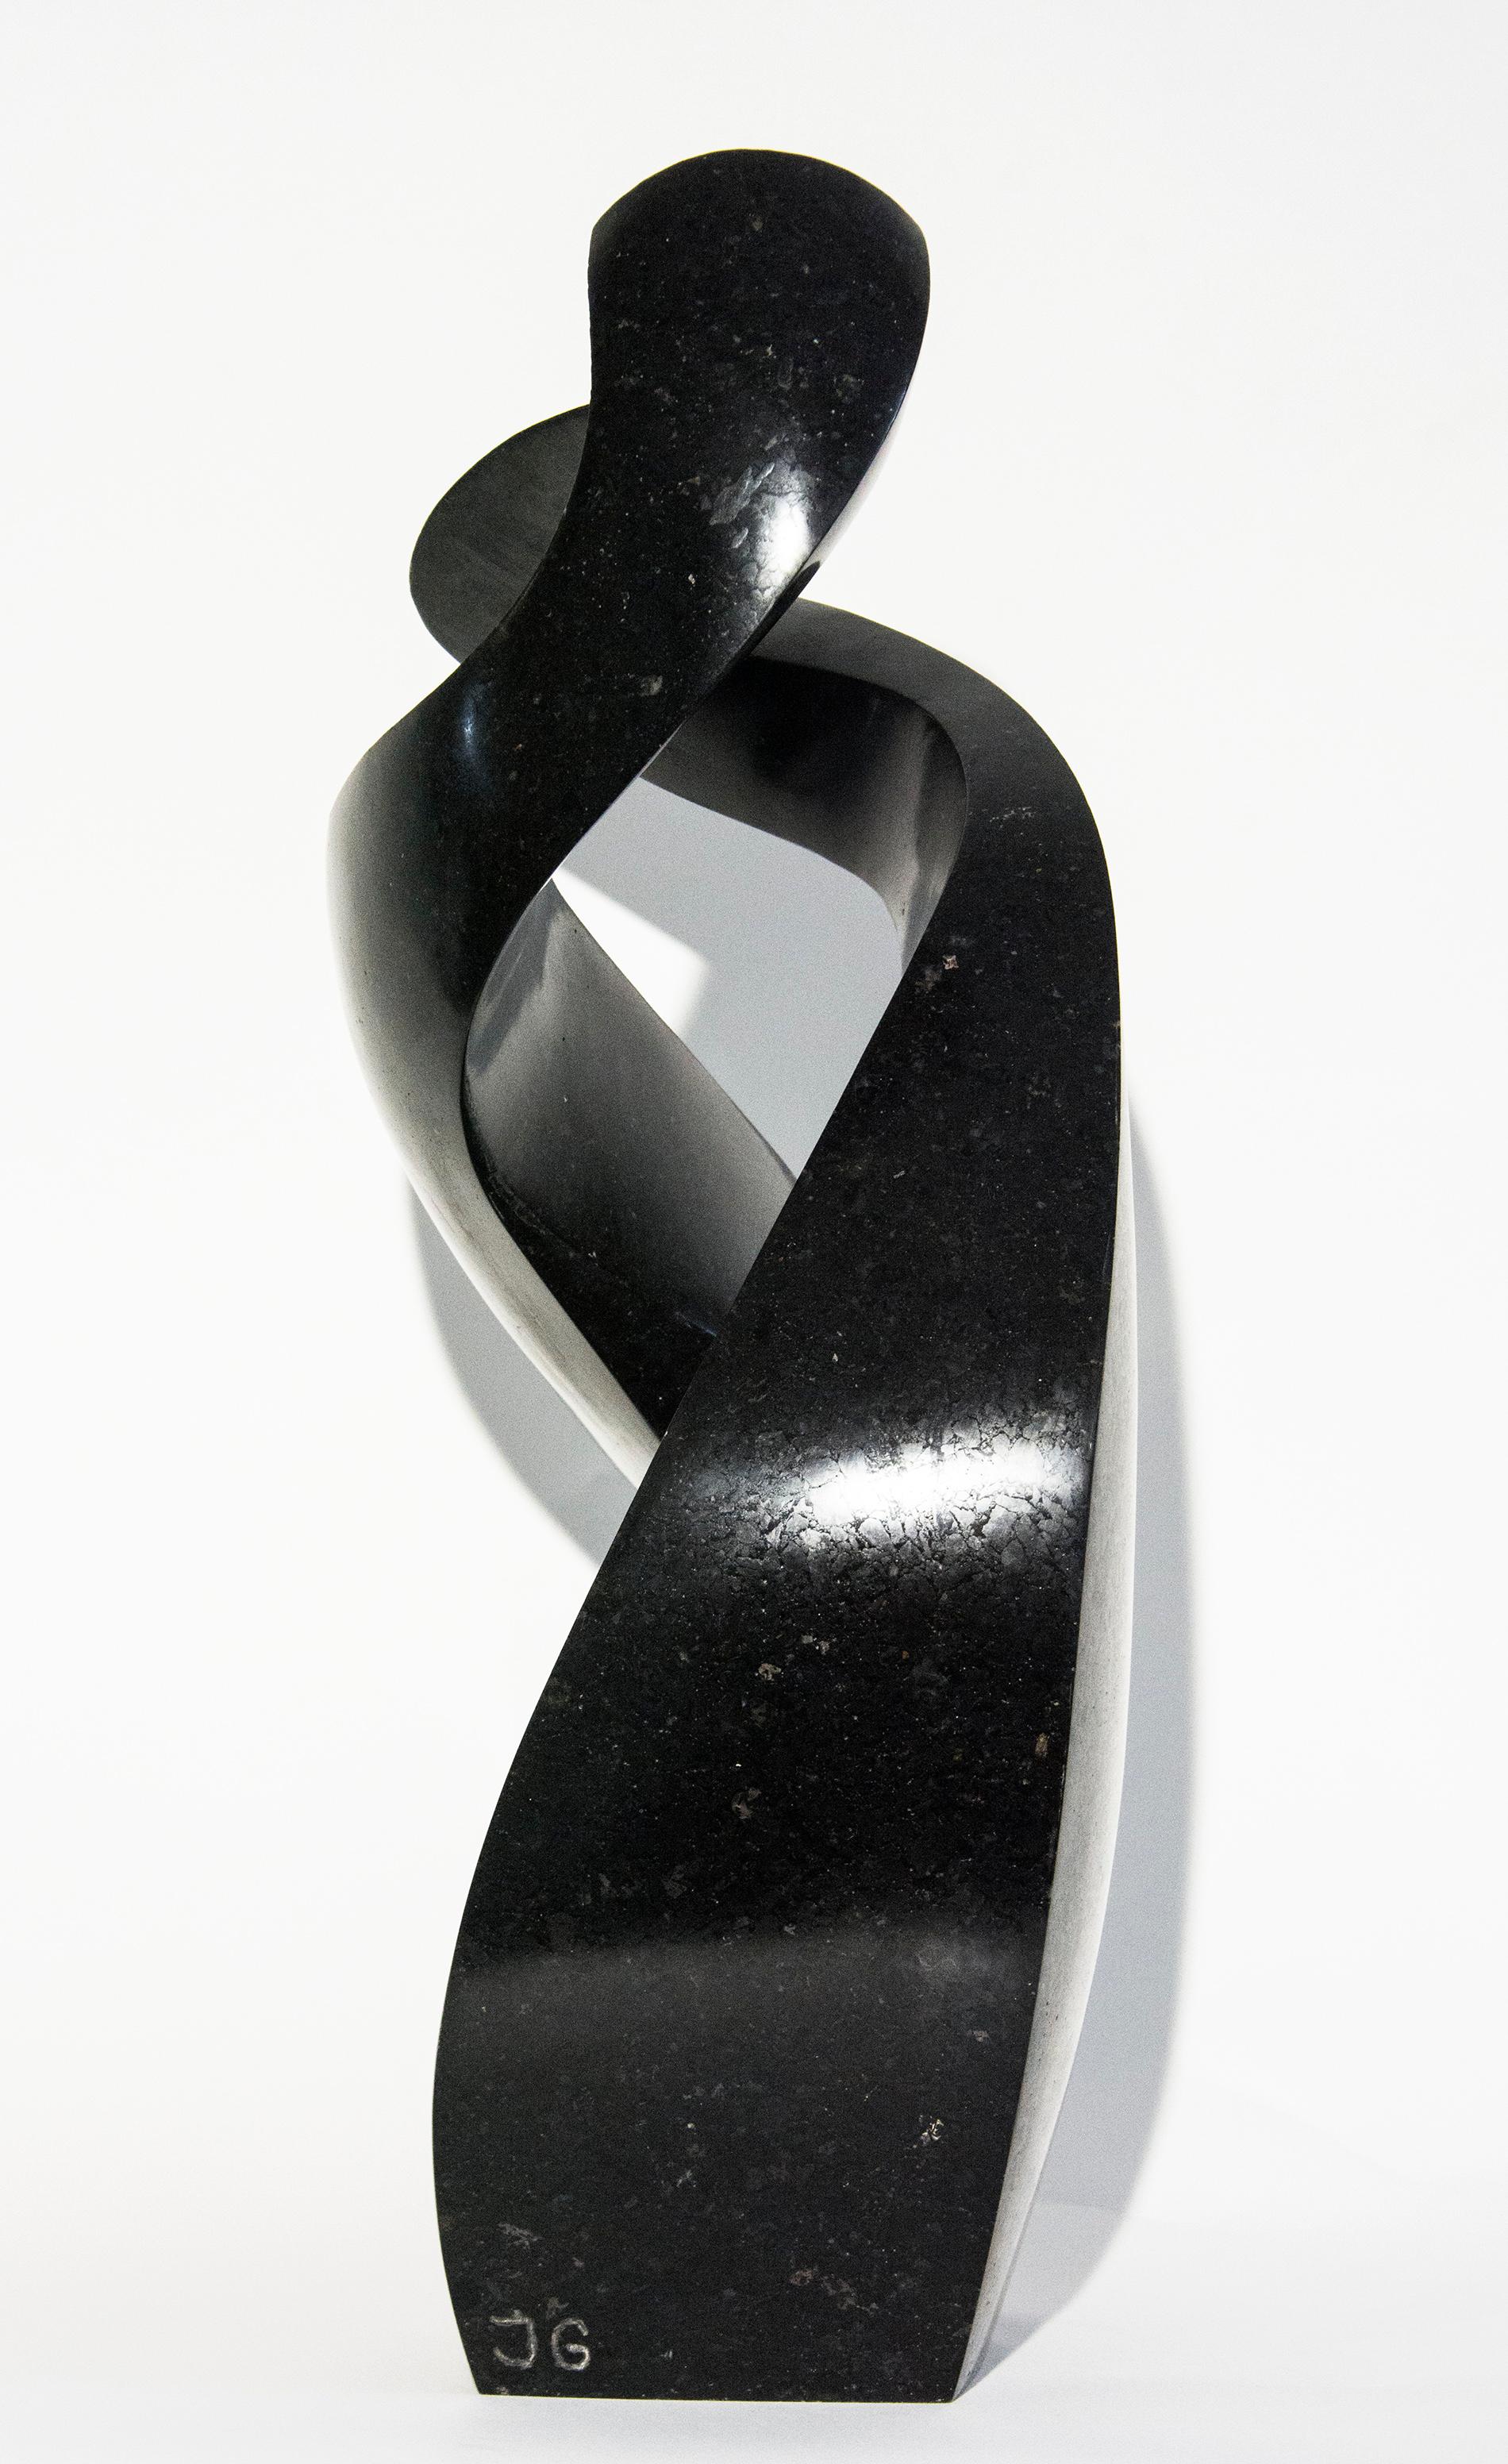 Embrace 4/50 - dark, smooth, polished, abstract, black granite sculpture - Contemporary Sculpture by Jeremy Guy